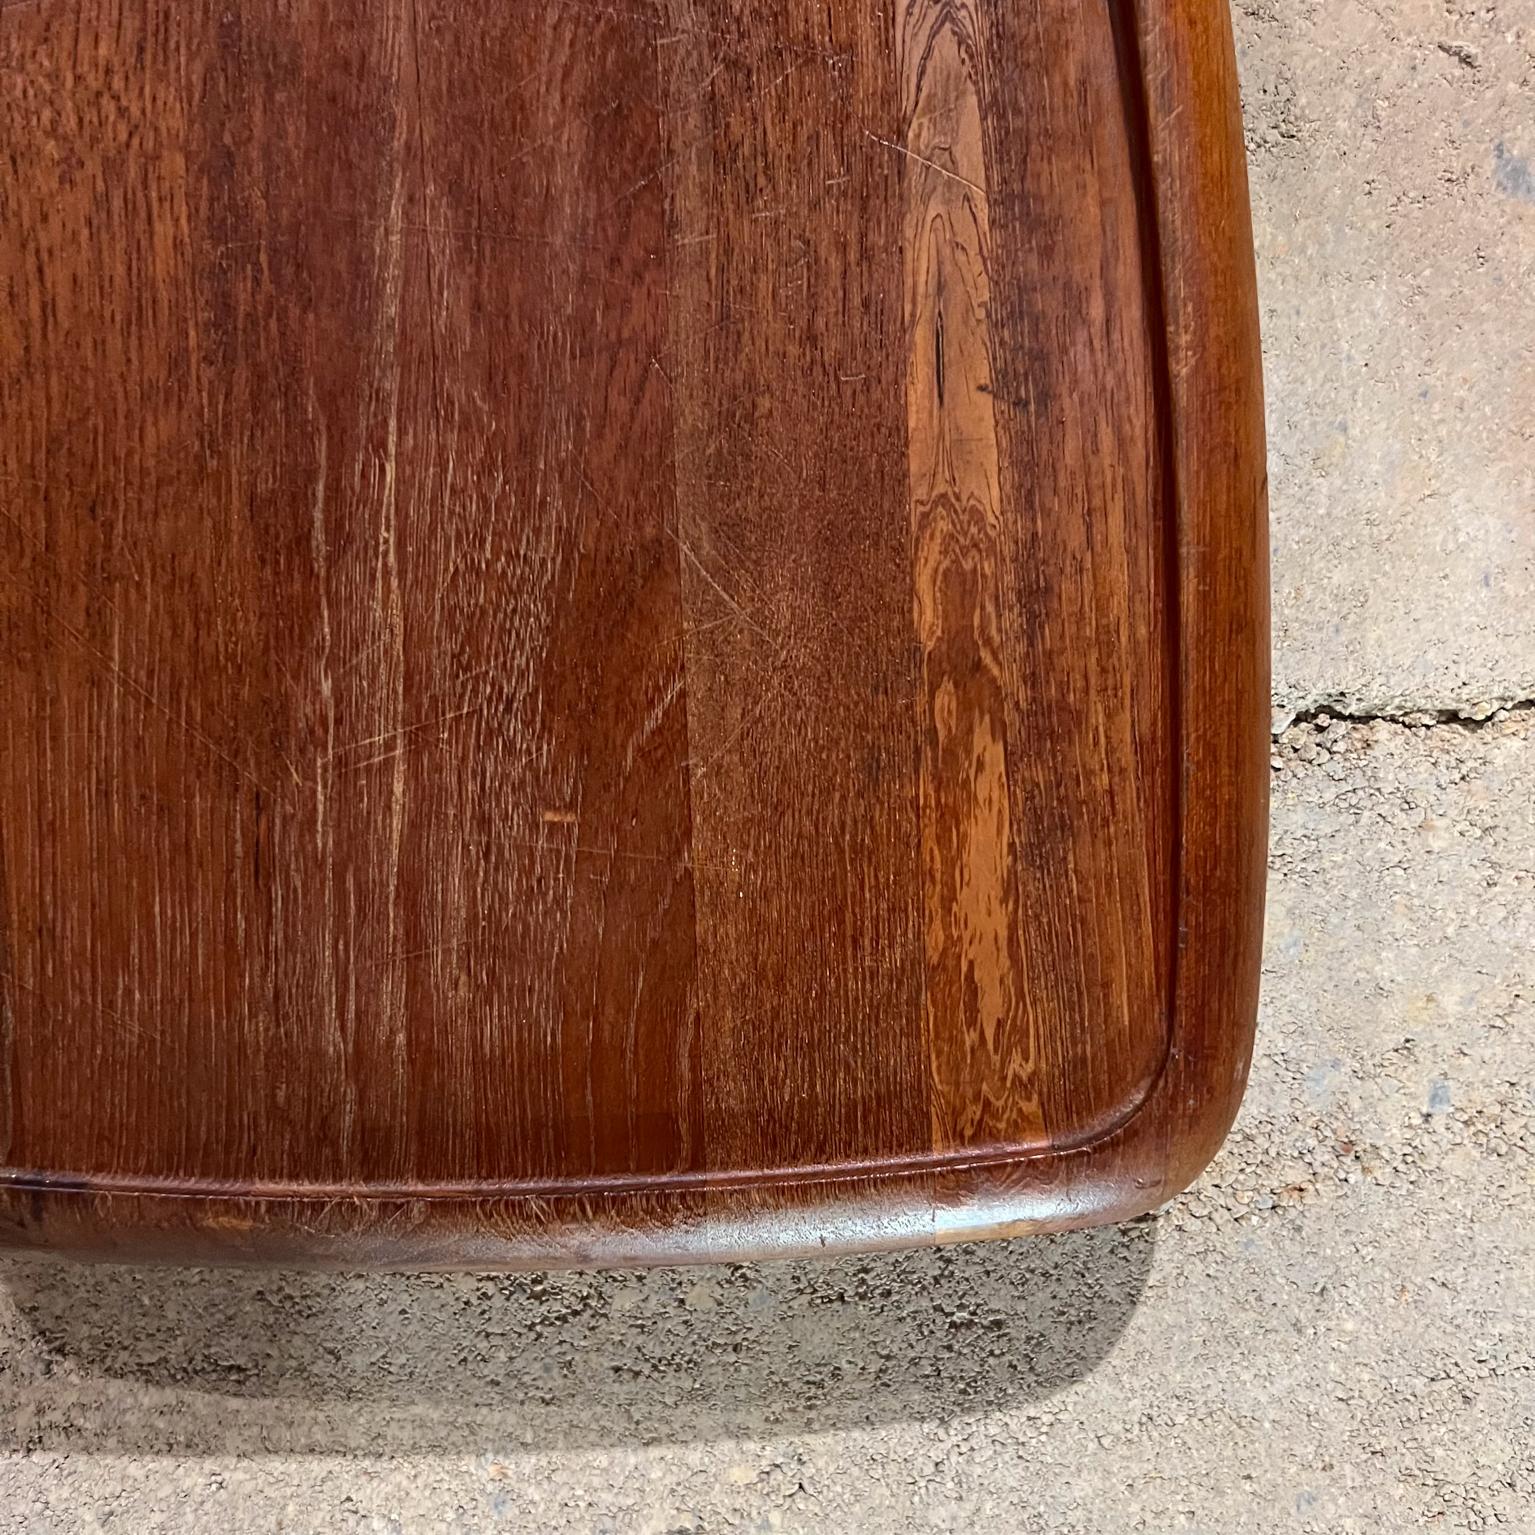 1960s Teak Tray Cutting Board Digsmed Denmark For Sale 1